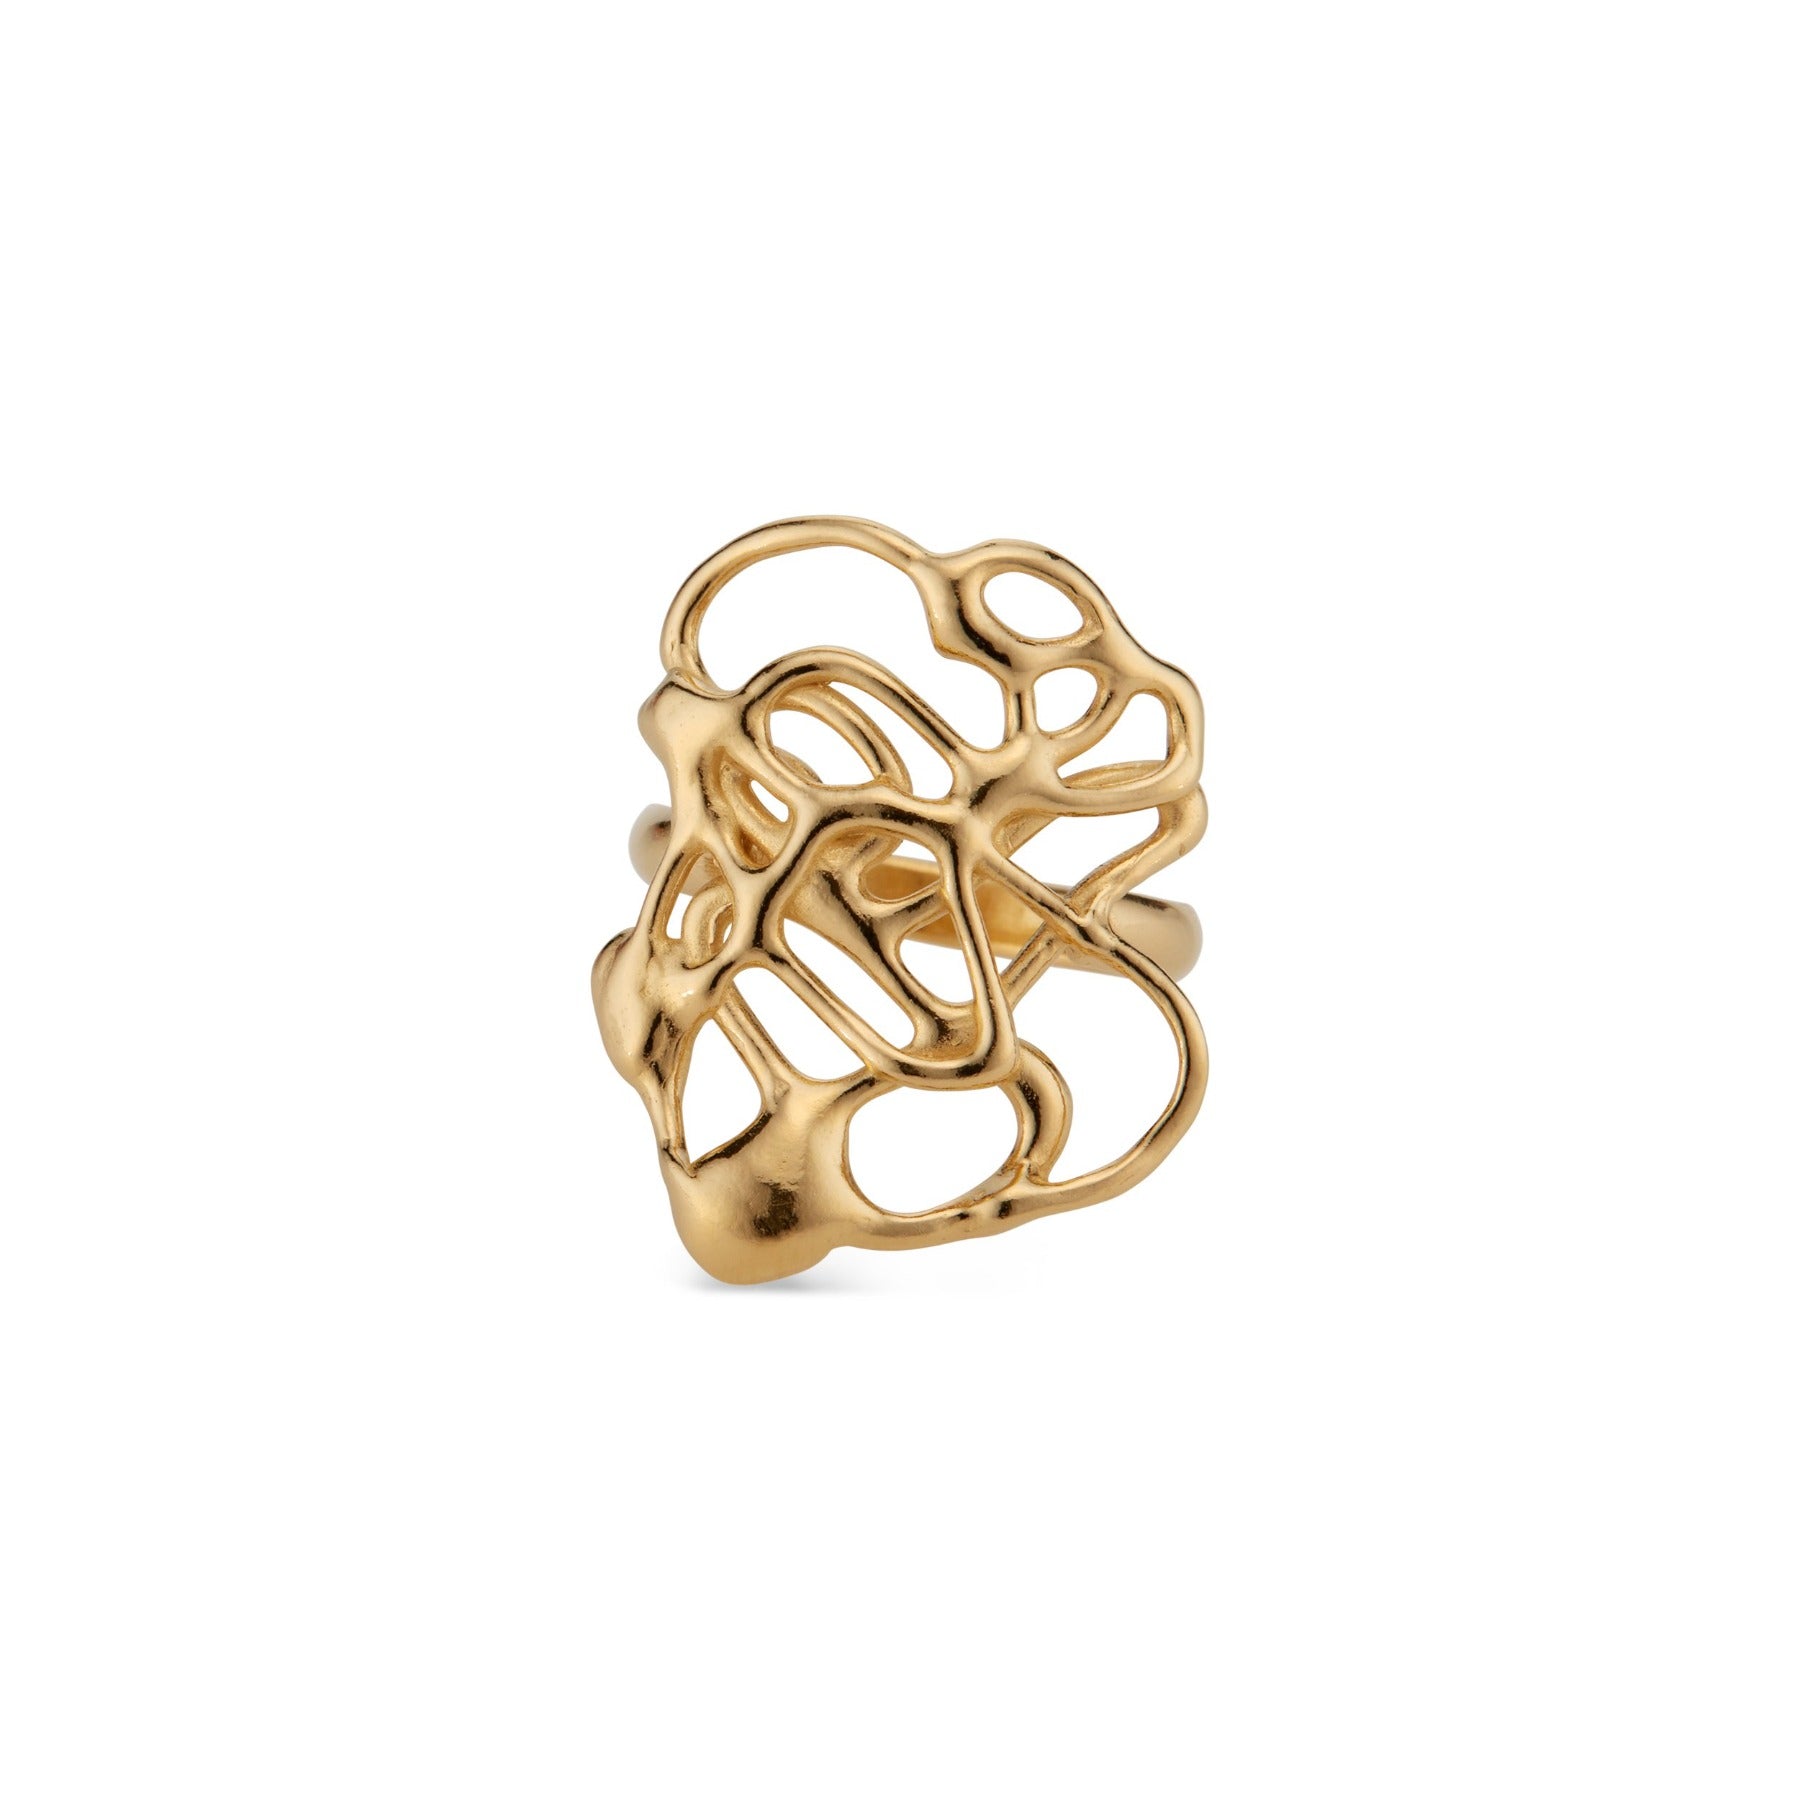 Front view of abstract, squiggle statement cocktail ring in 18k gold vermeil.